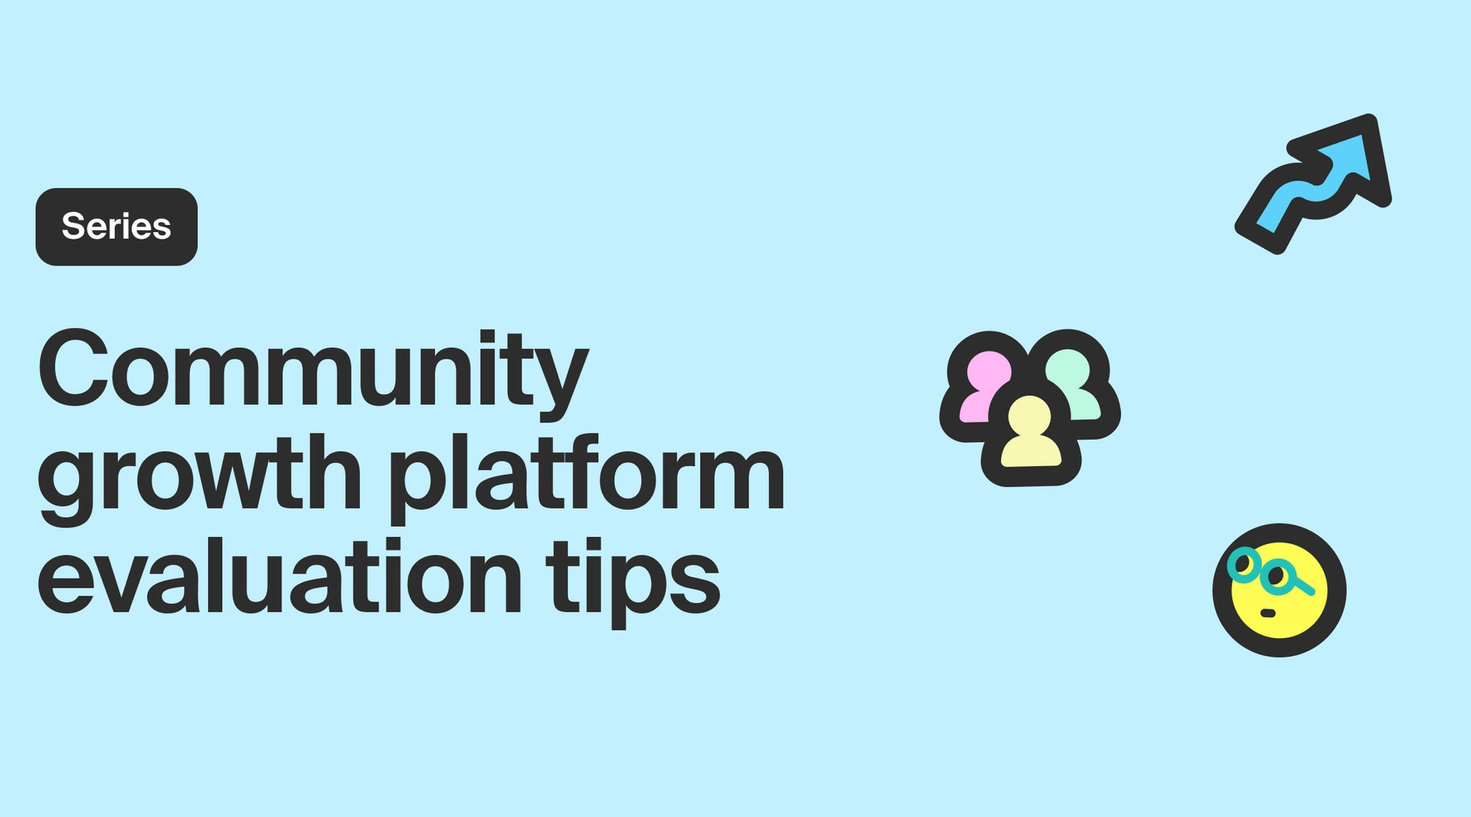 How to evaluate community growth platforms